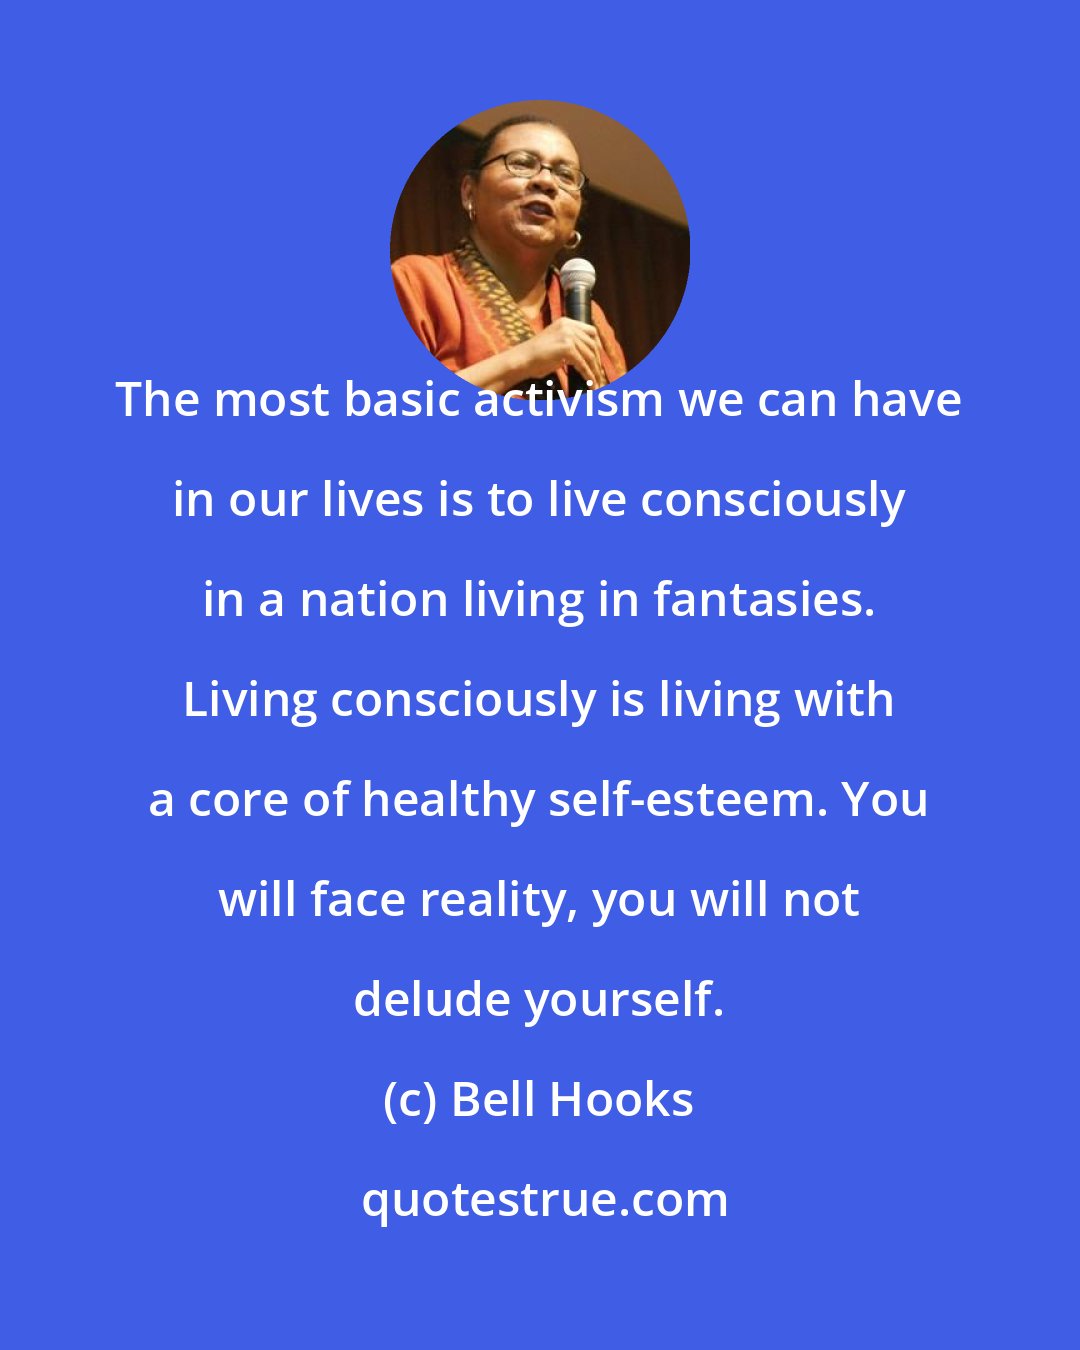 Bell Hooks: The most basic activism we can have in our lives is to live consciously in a nation living in fantasies. Living consciously is living with a core of healthy self-esteem. You will face reality, you will not delude yourself.